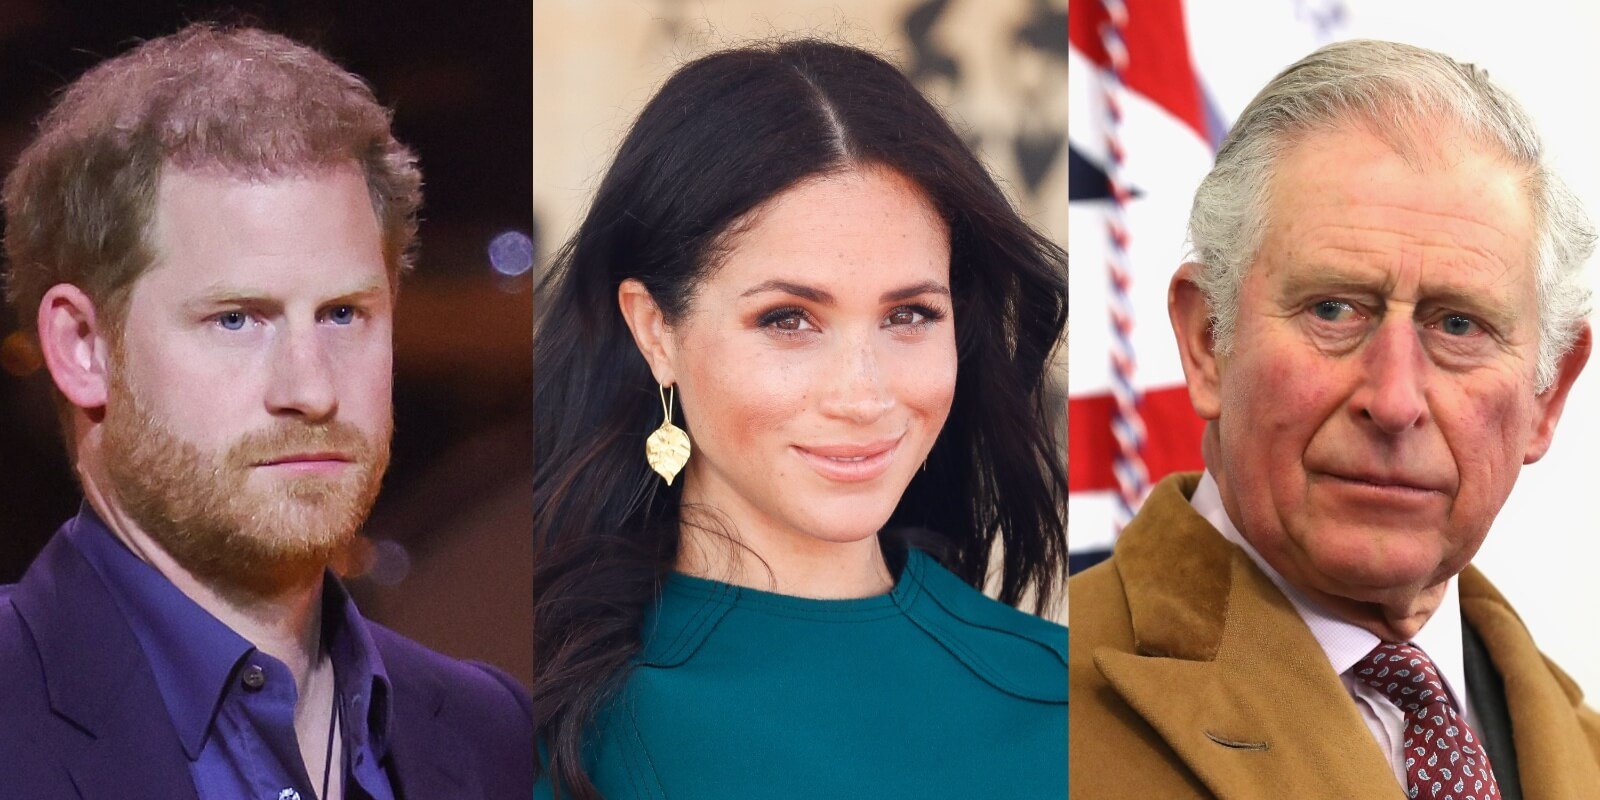 Prince Harry may be forced to choose between Meghan Markle and King Charles on coronation day.